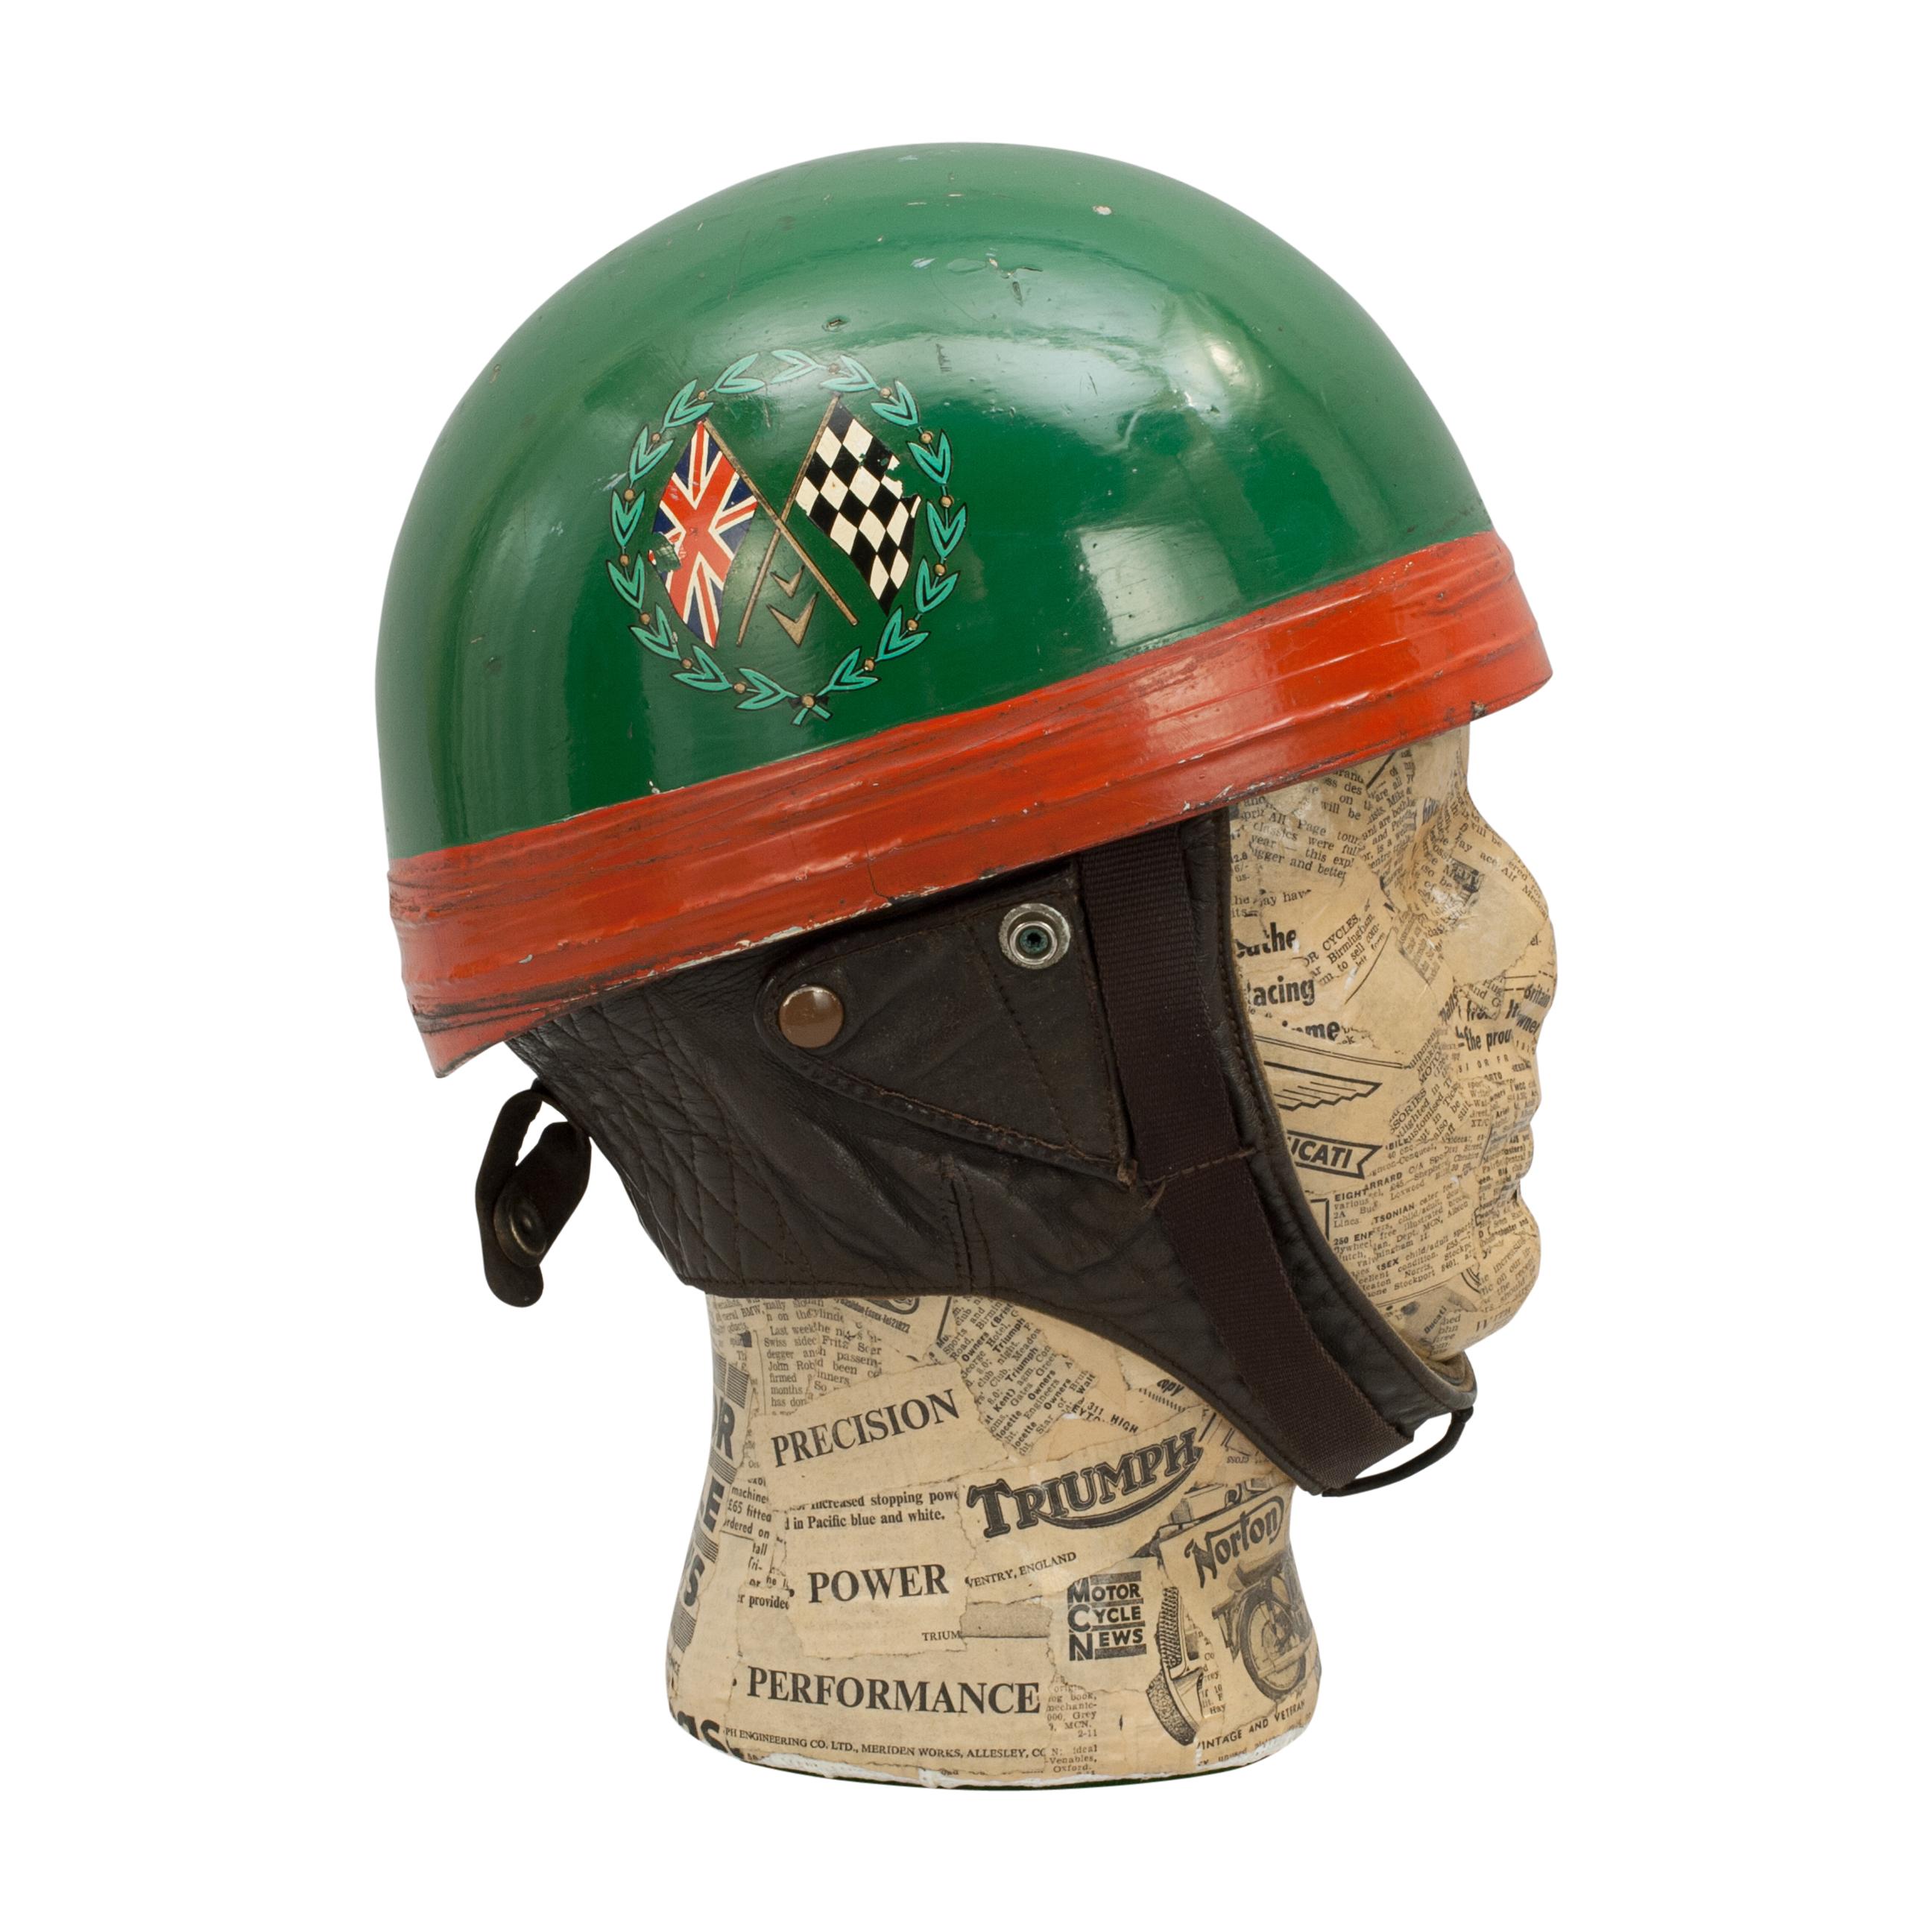 Vintage racing Cromwell crash helmet.
A green painted motorcycle, pudding basin shape helmet made in England by Cromwell. There are decals on the helmet, Castrol on one side and crossed Union flag with chequer flag surrounded with a laurel wreath